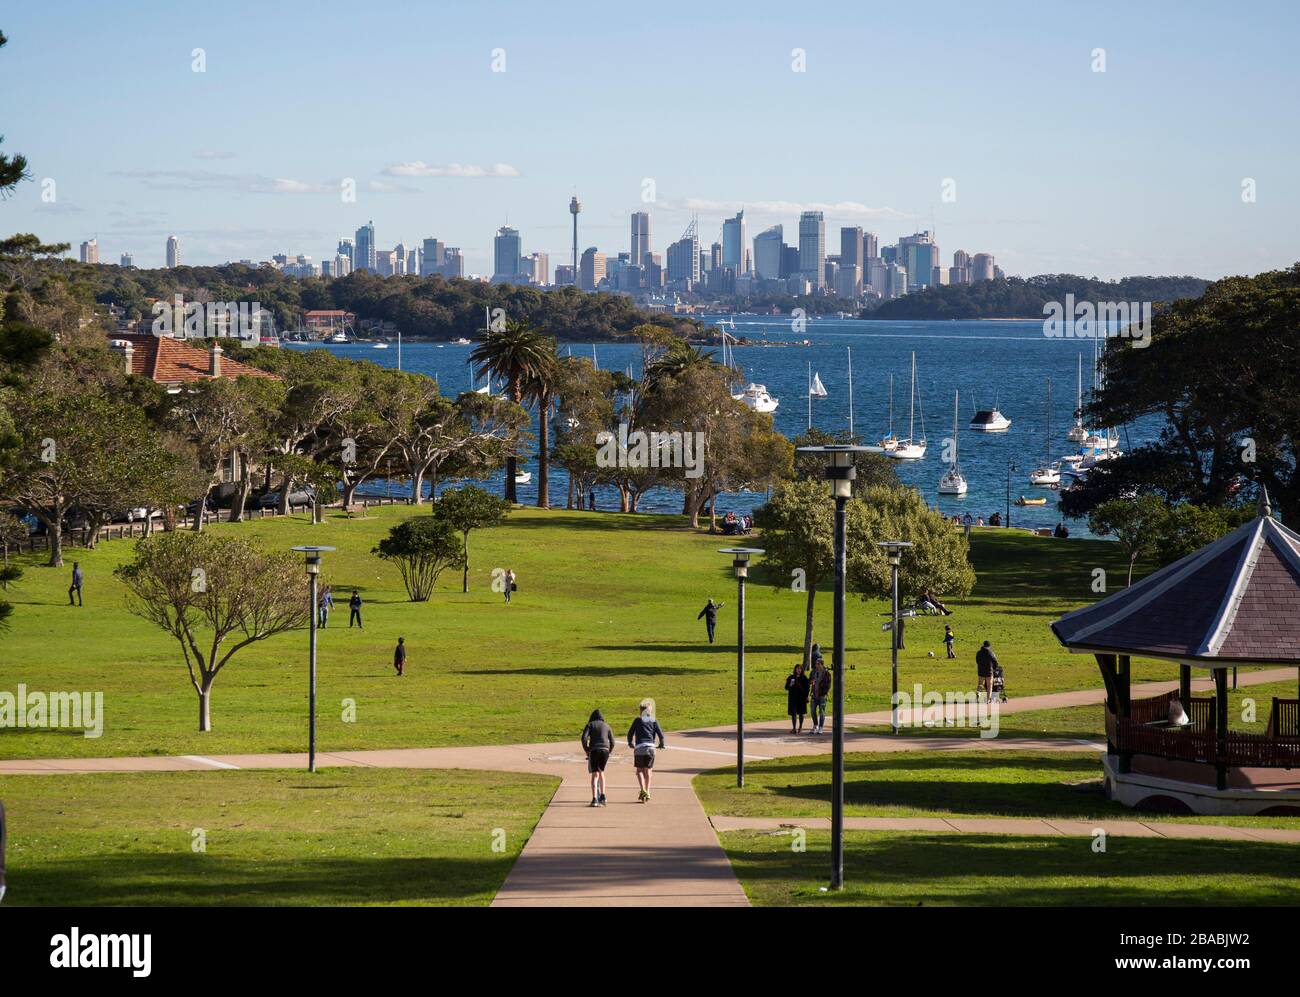 A general view of Sydney, Australia as seen from Watsons Bay. Stock Photo